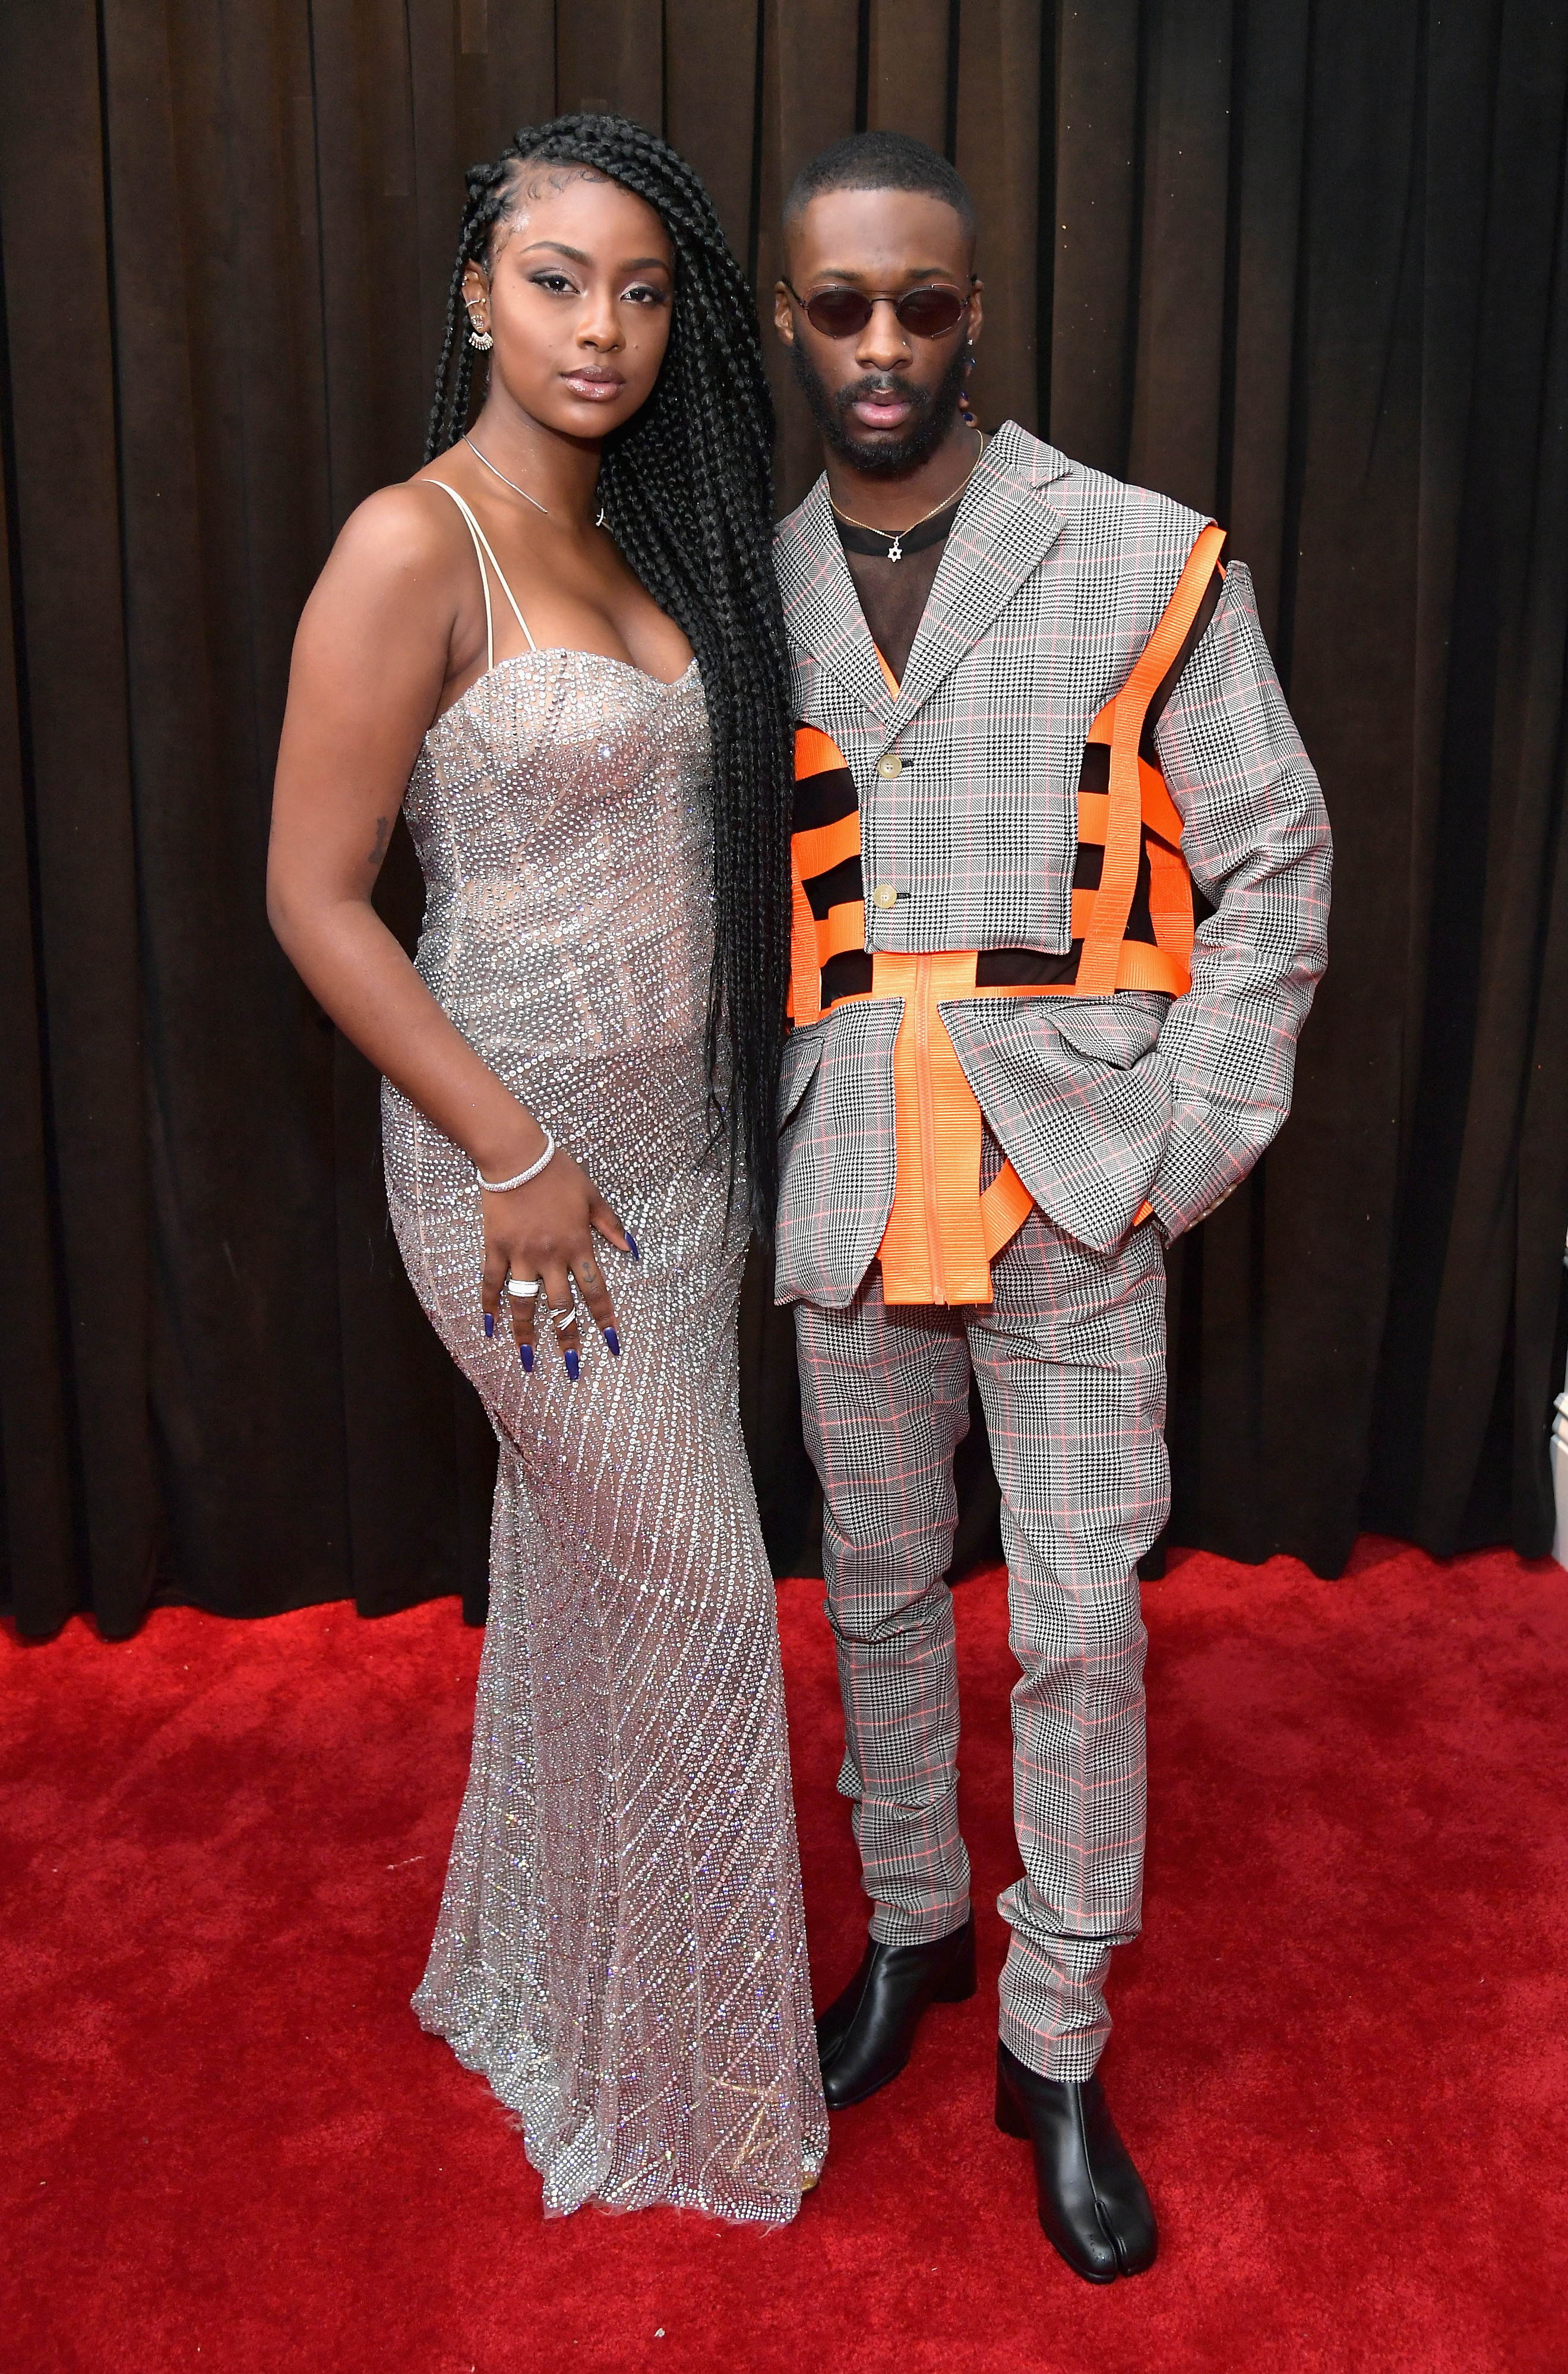 Justine Skye and rapper GoldLink attend the 61st Annual Grammy Awards at Staples Center on February 10, 2019 in Los Angeles, California | Source: Getty Images